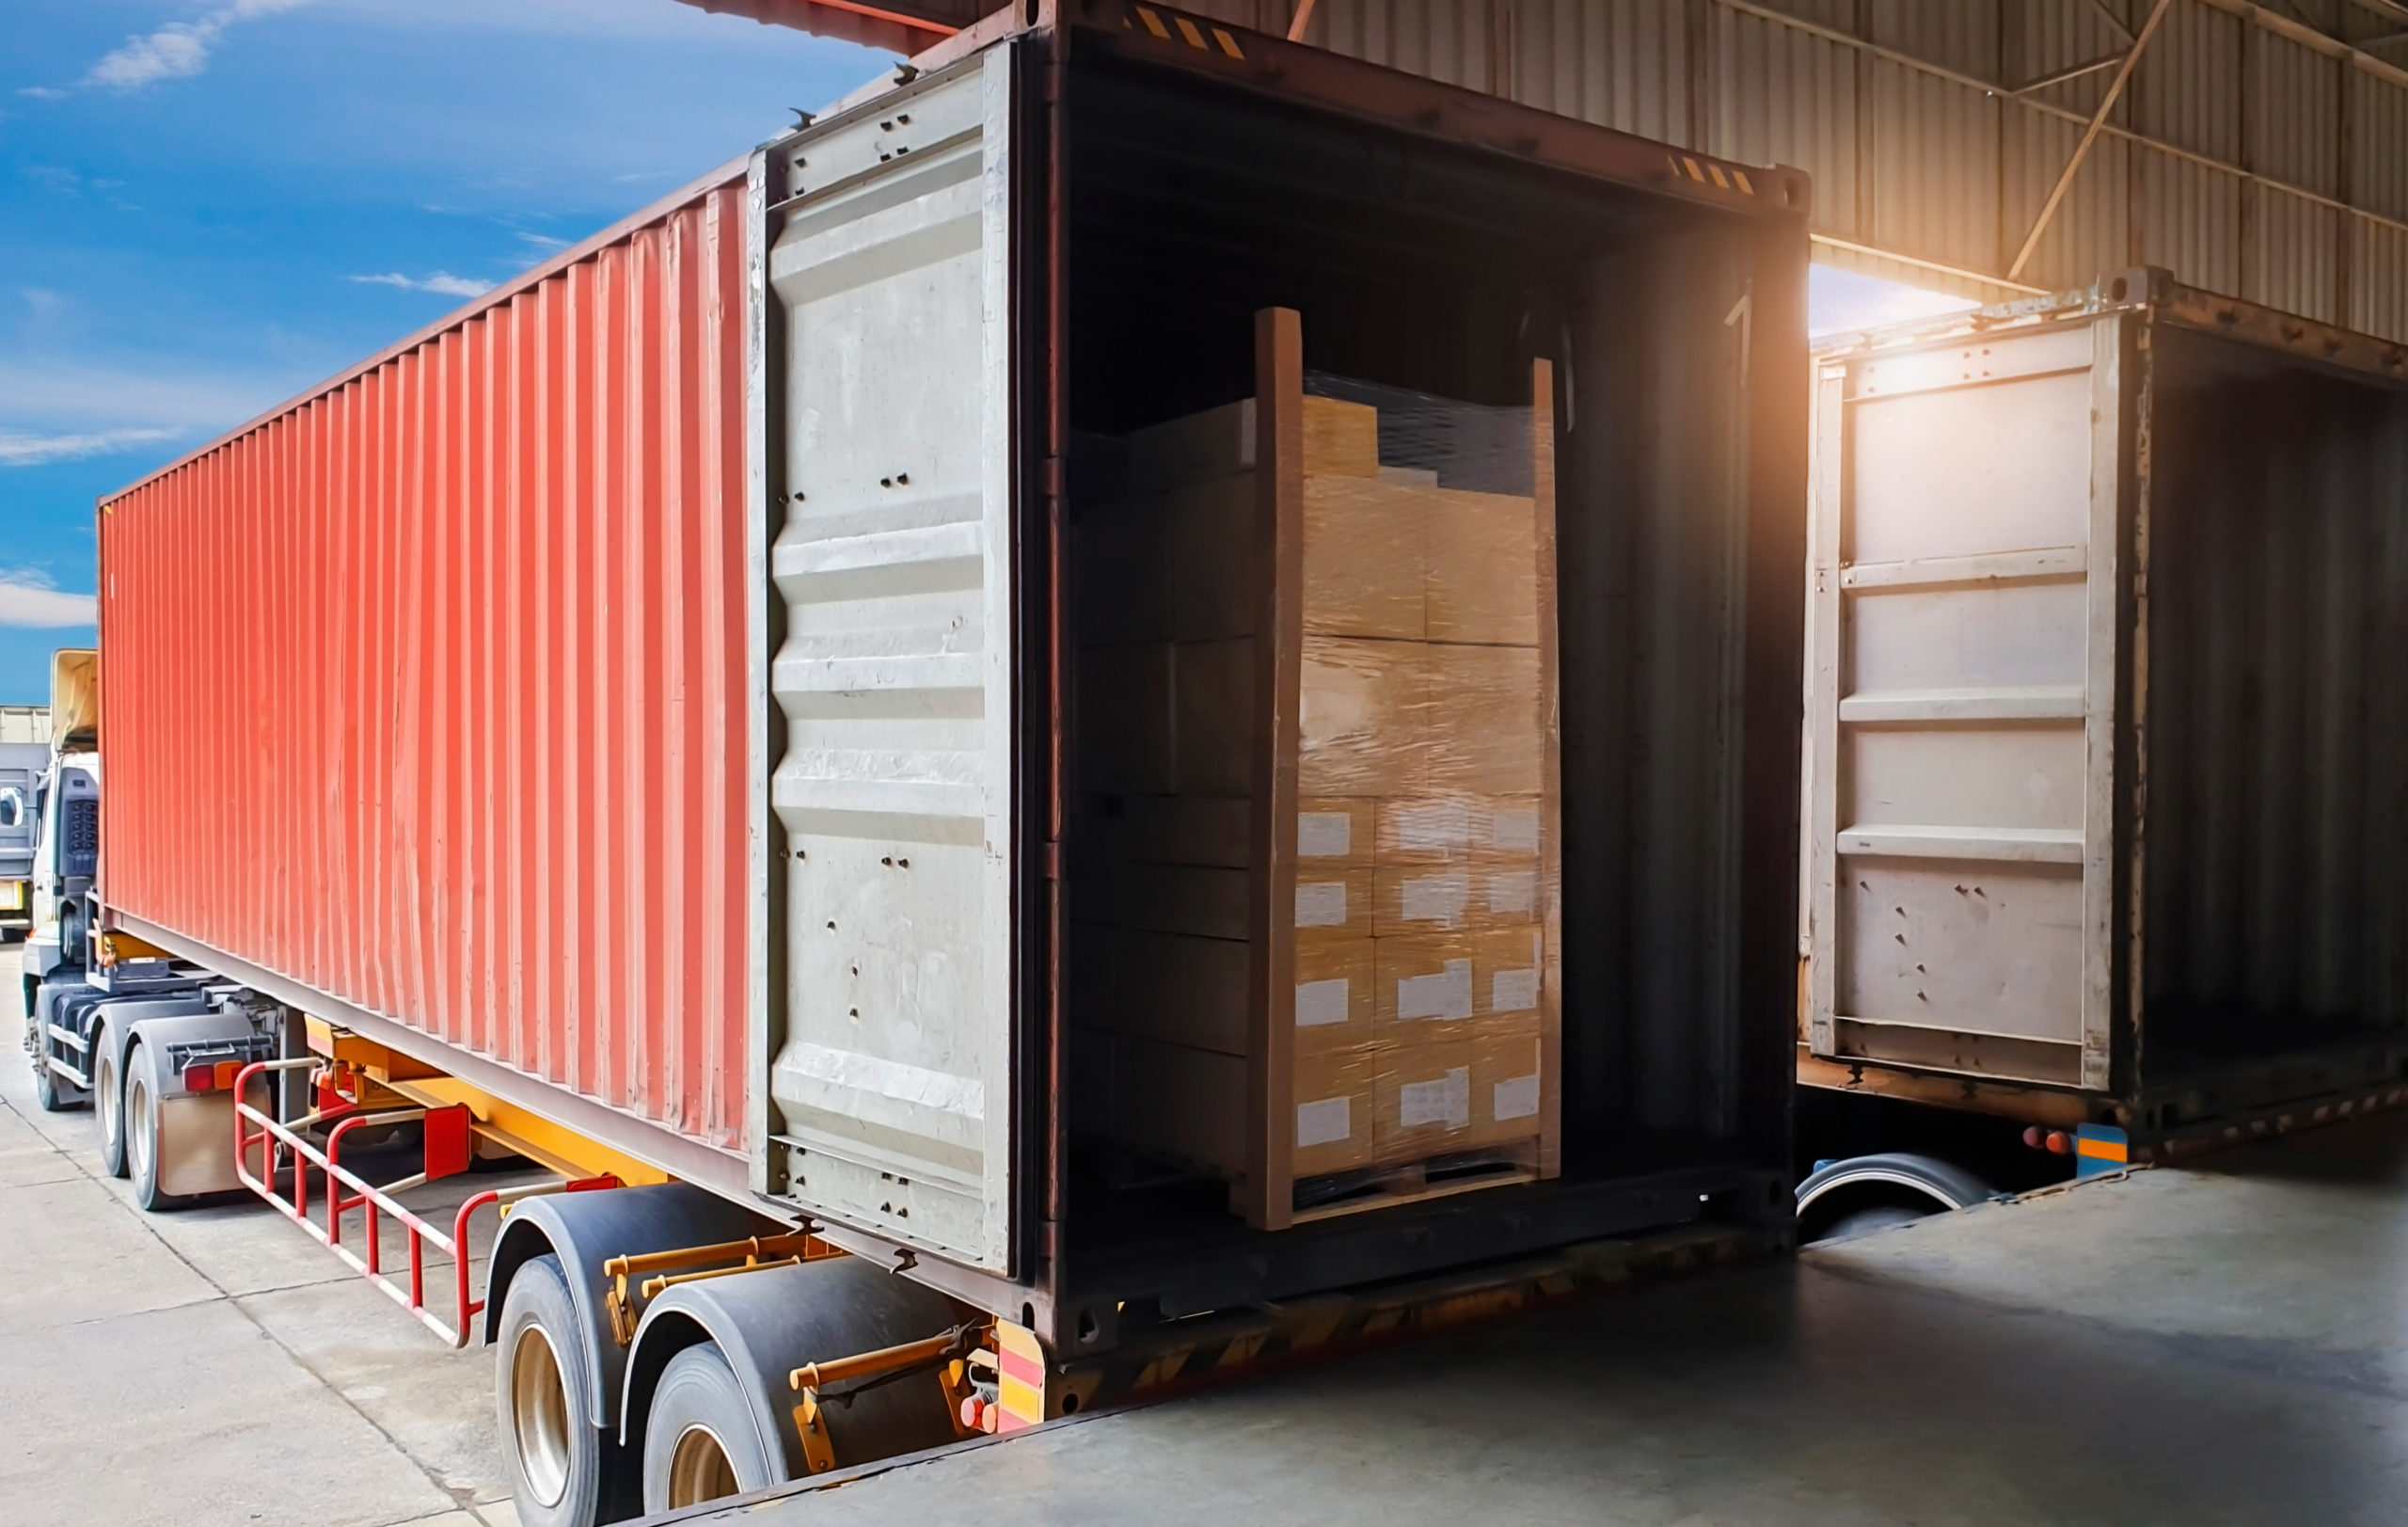 Seven Ways a Third-party Logistics Company May Improve Your LTL Shipping